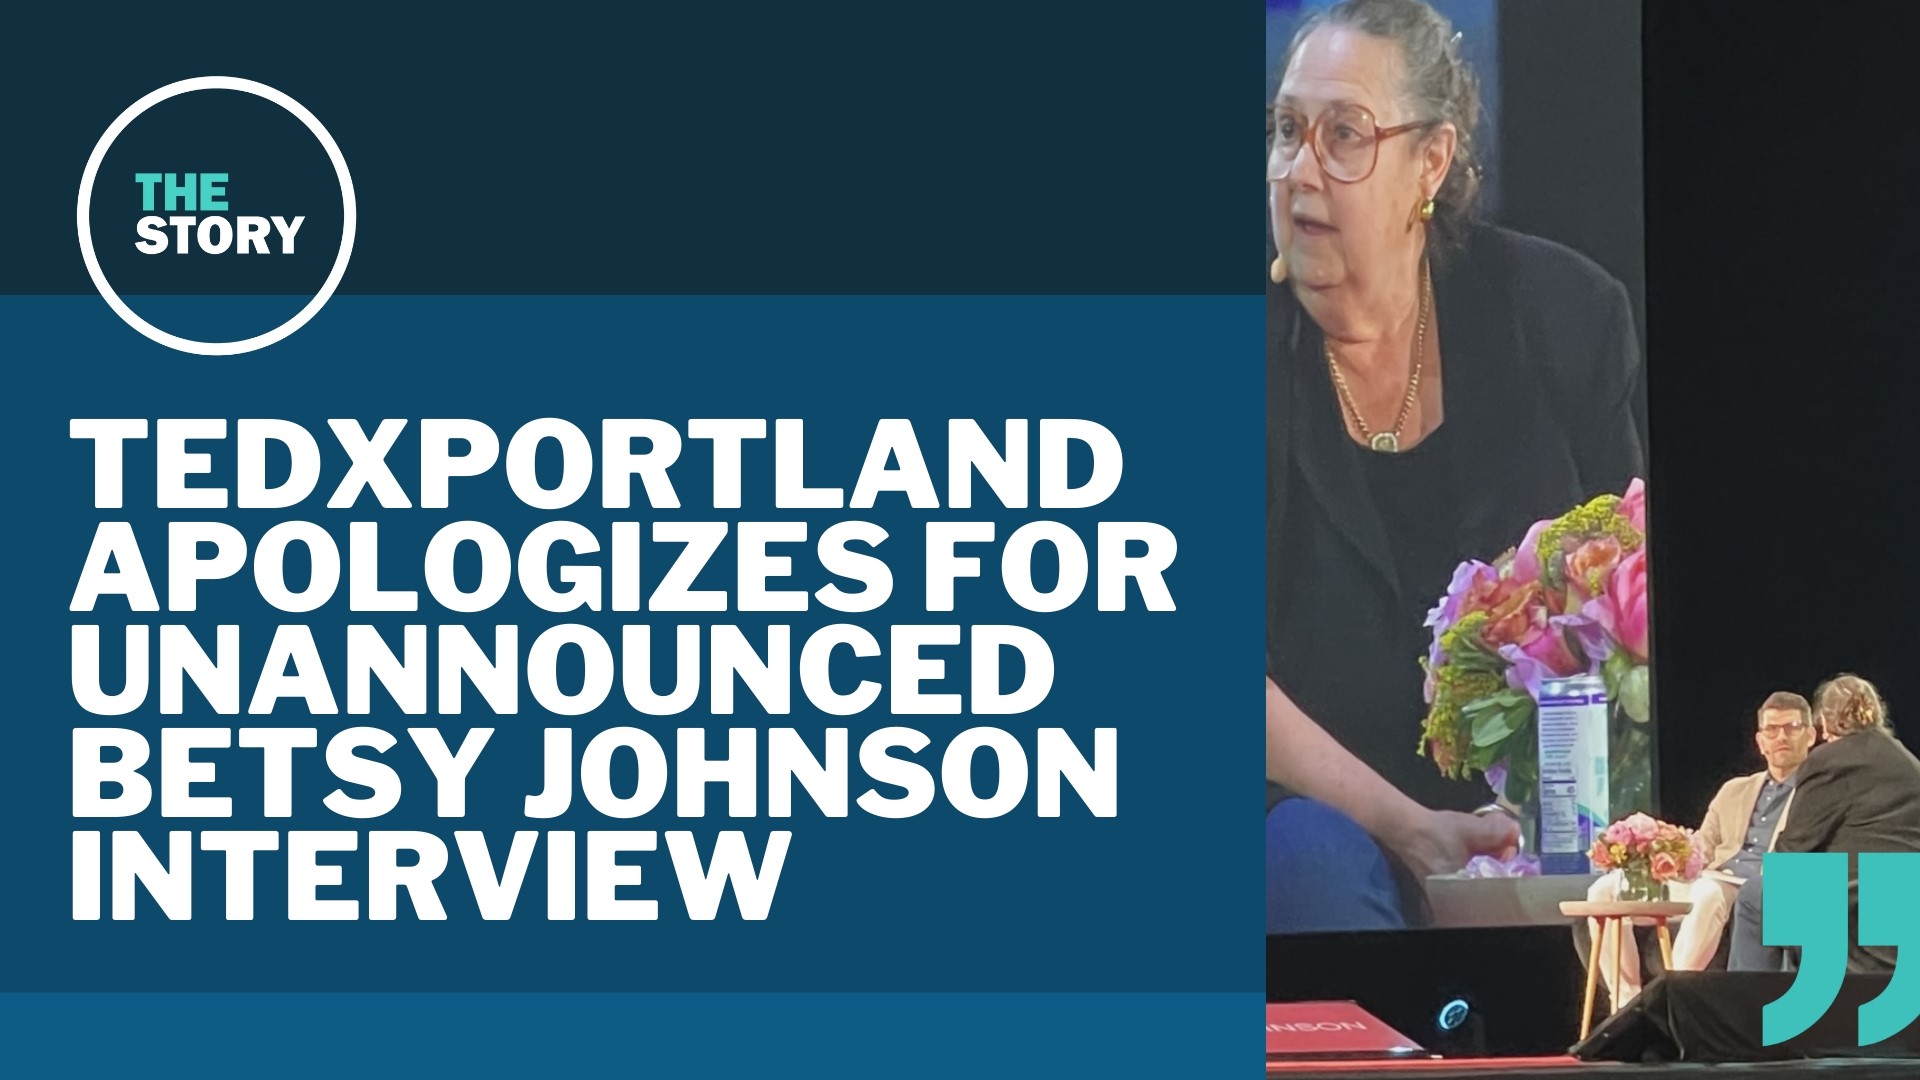 An unannounced conversation with Oregon gubernatorial candidate Betsy Johnson at TEDxPortland sparked frustration among some crowd members